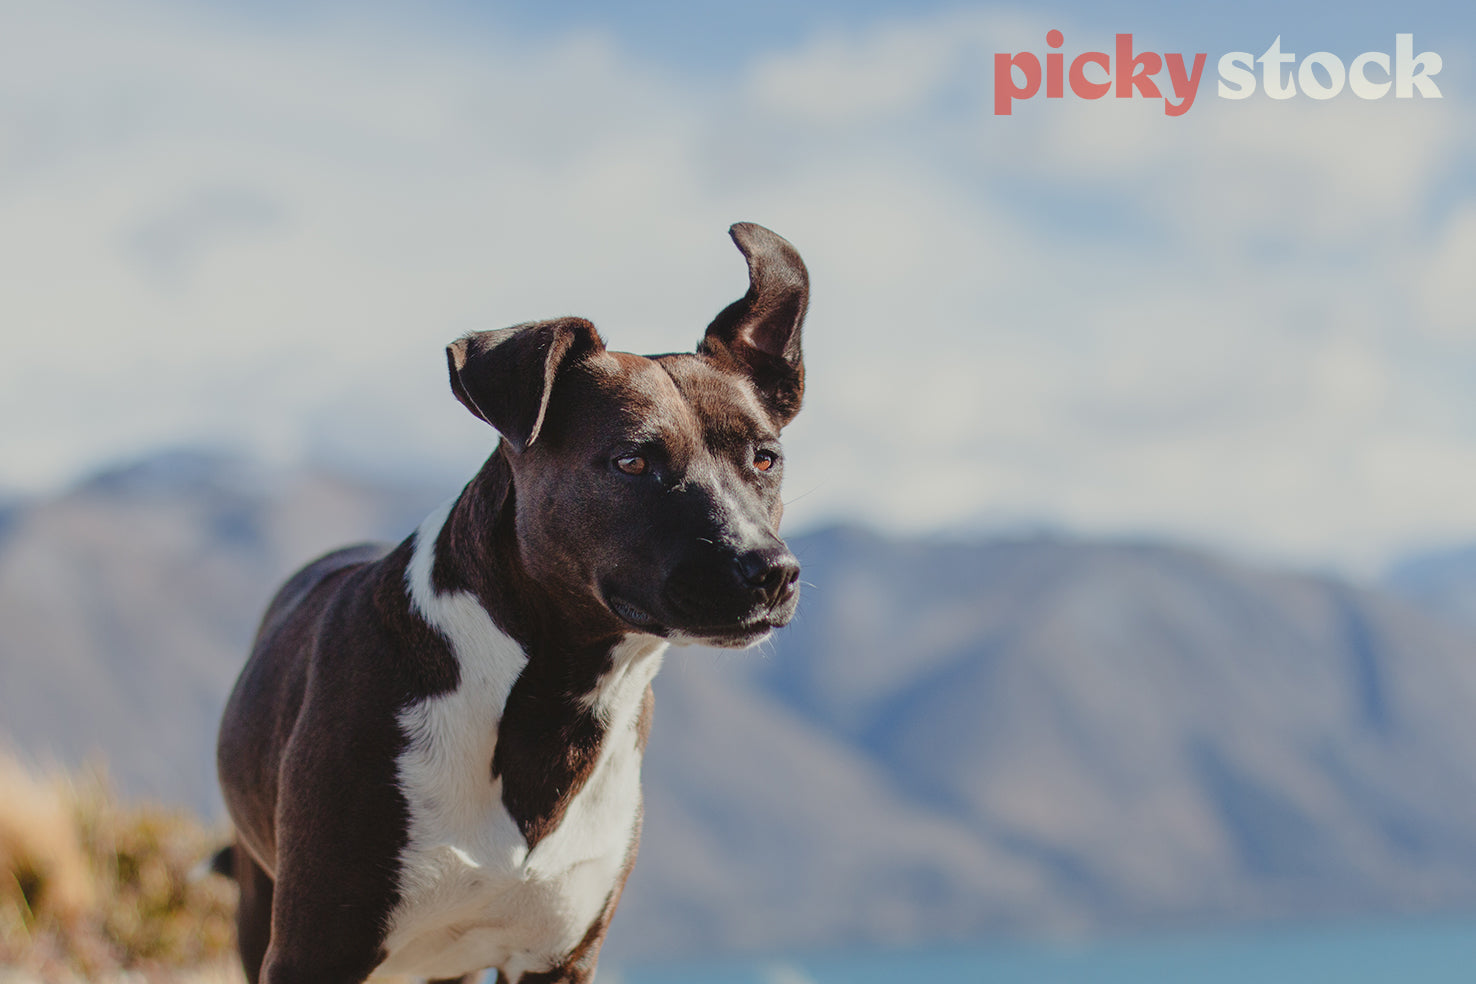 Close up of brown and white Terrier dog standing on ridge the left ear up at the view of Ben Ohau, Canterbury. Background has a blue sky and mountain out of focus. Dog is looking off camera slightly